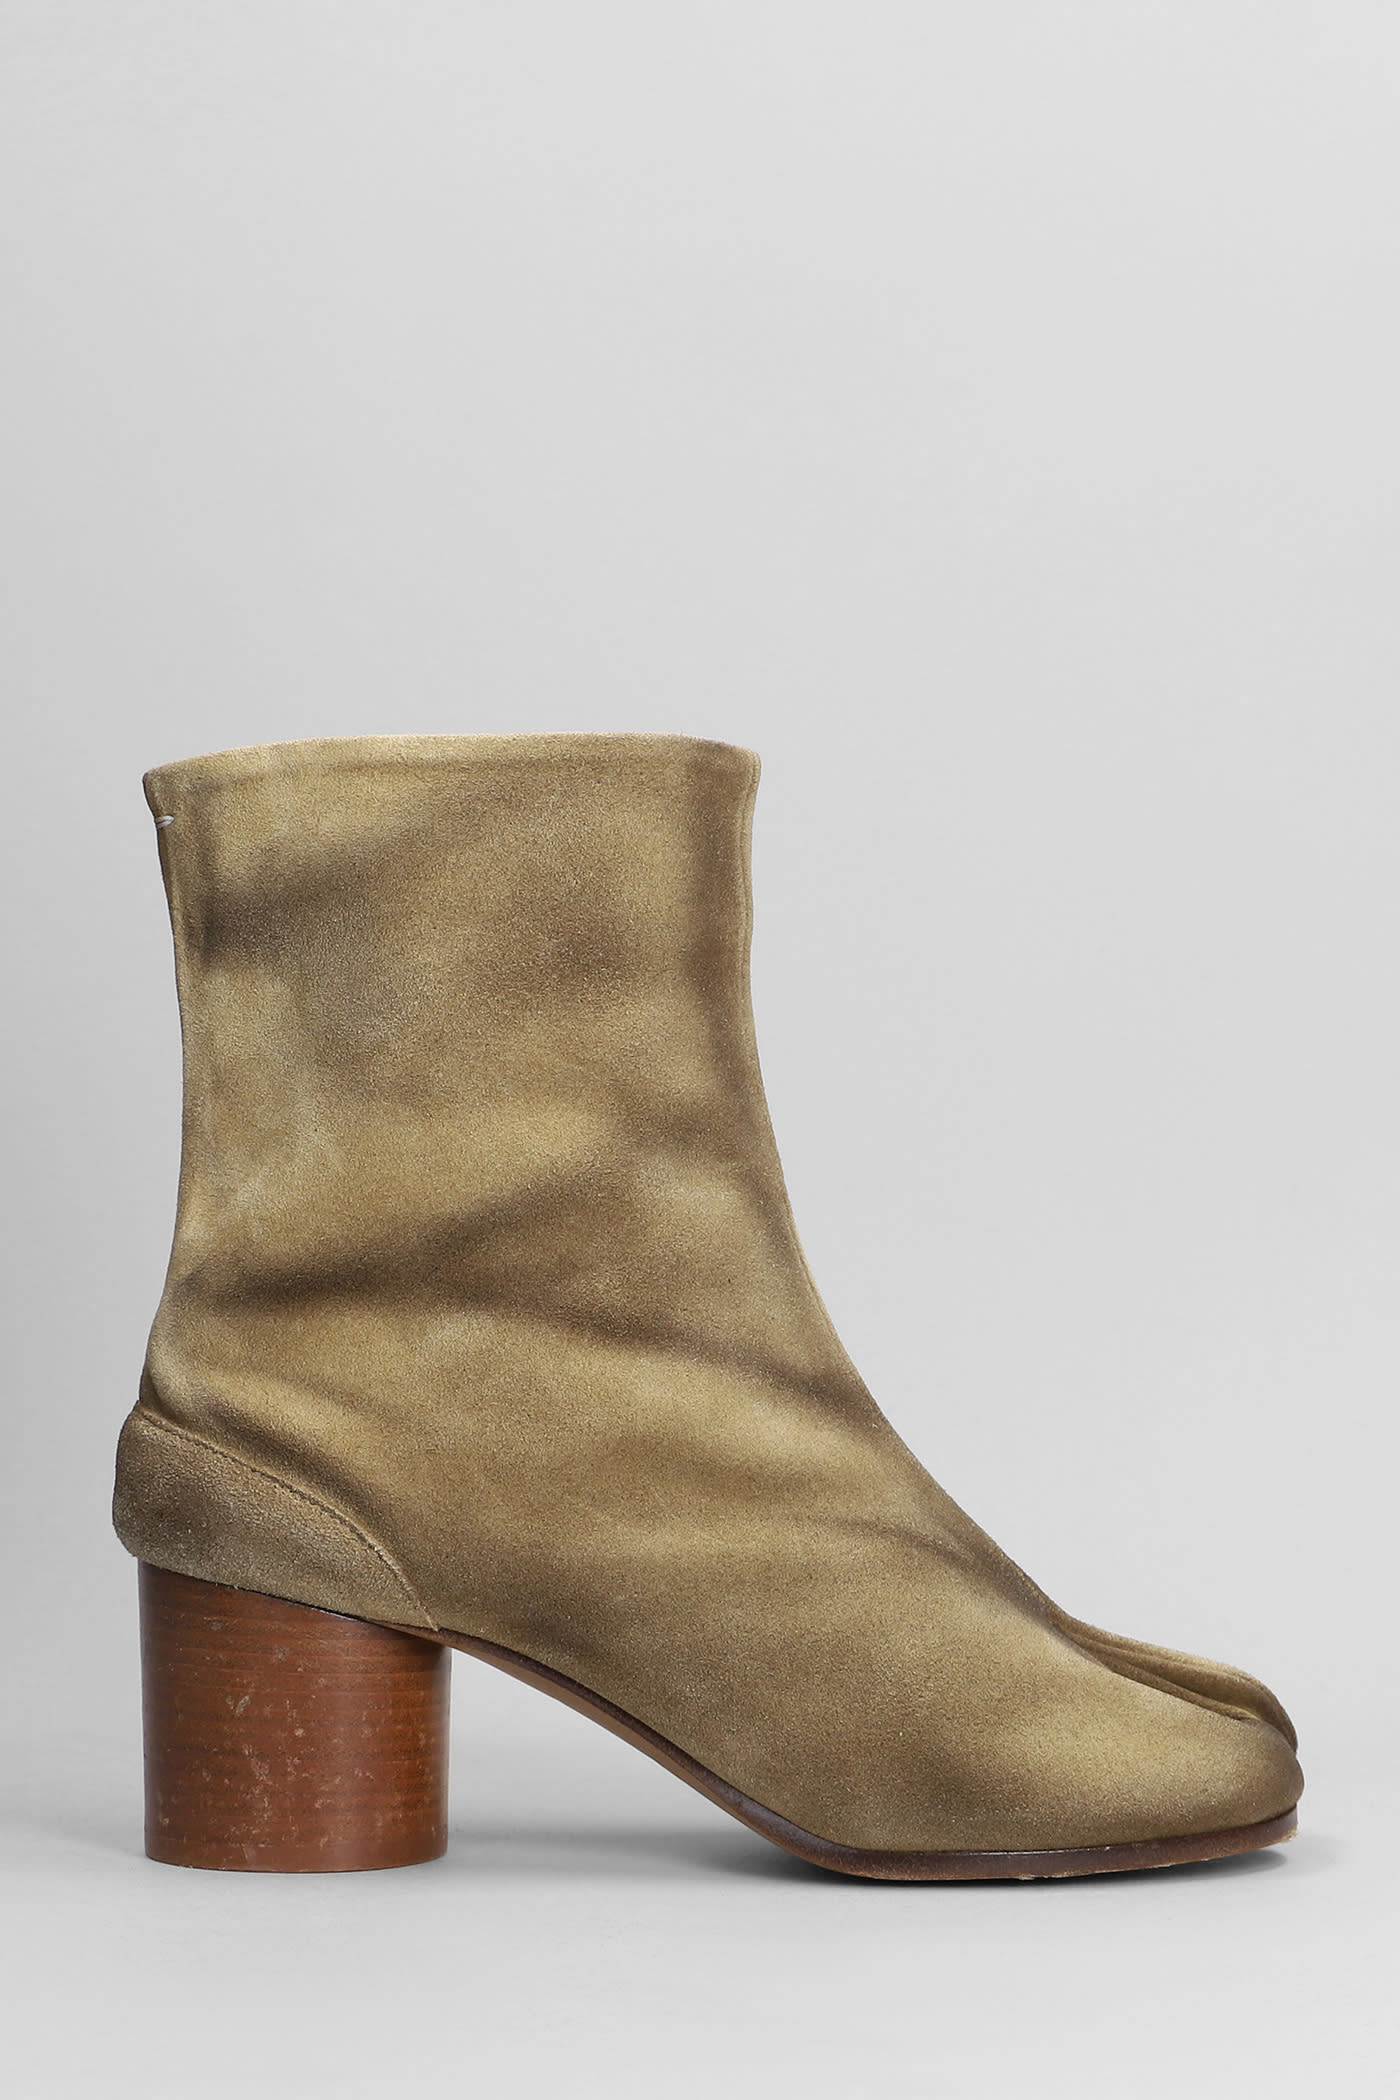 Maison Margiela Tabi Ankle Boots In Camel Suede